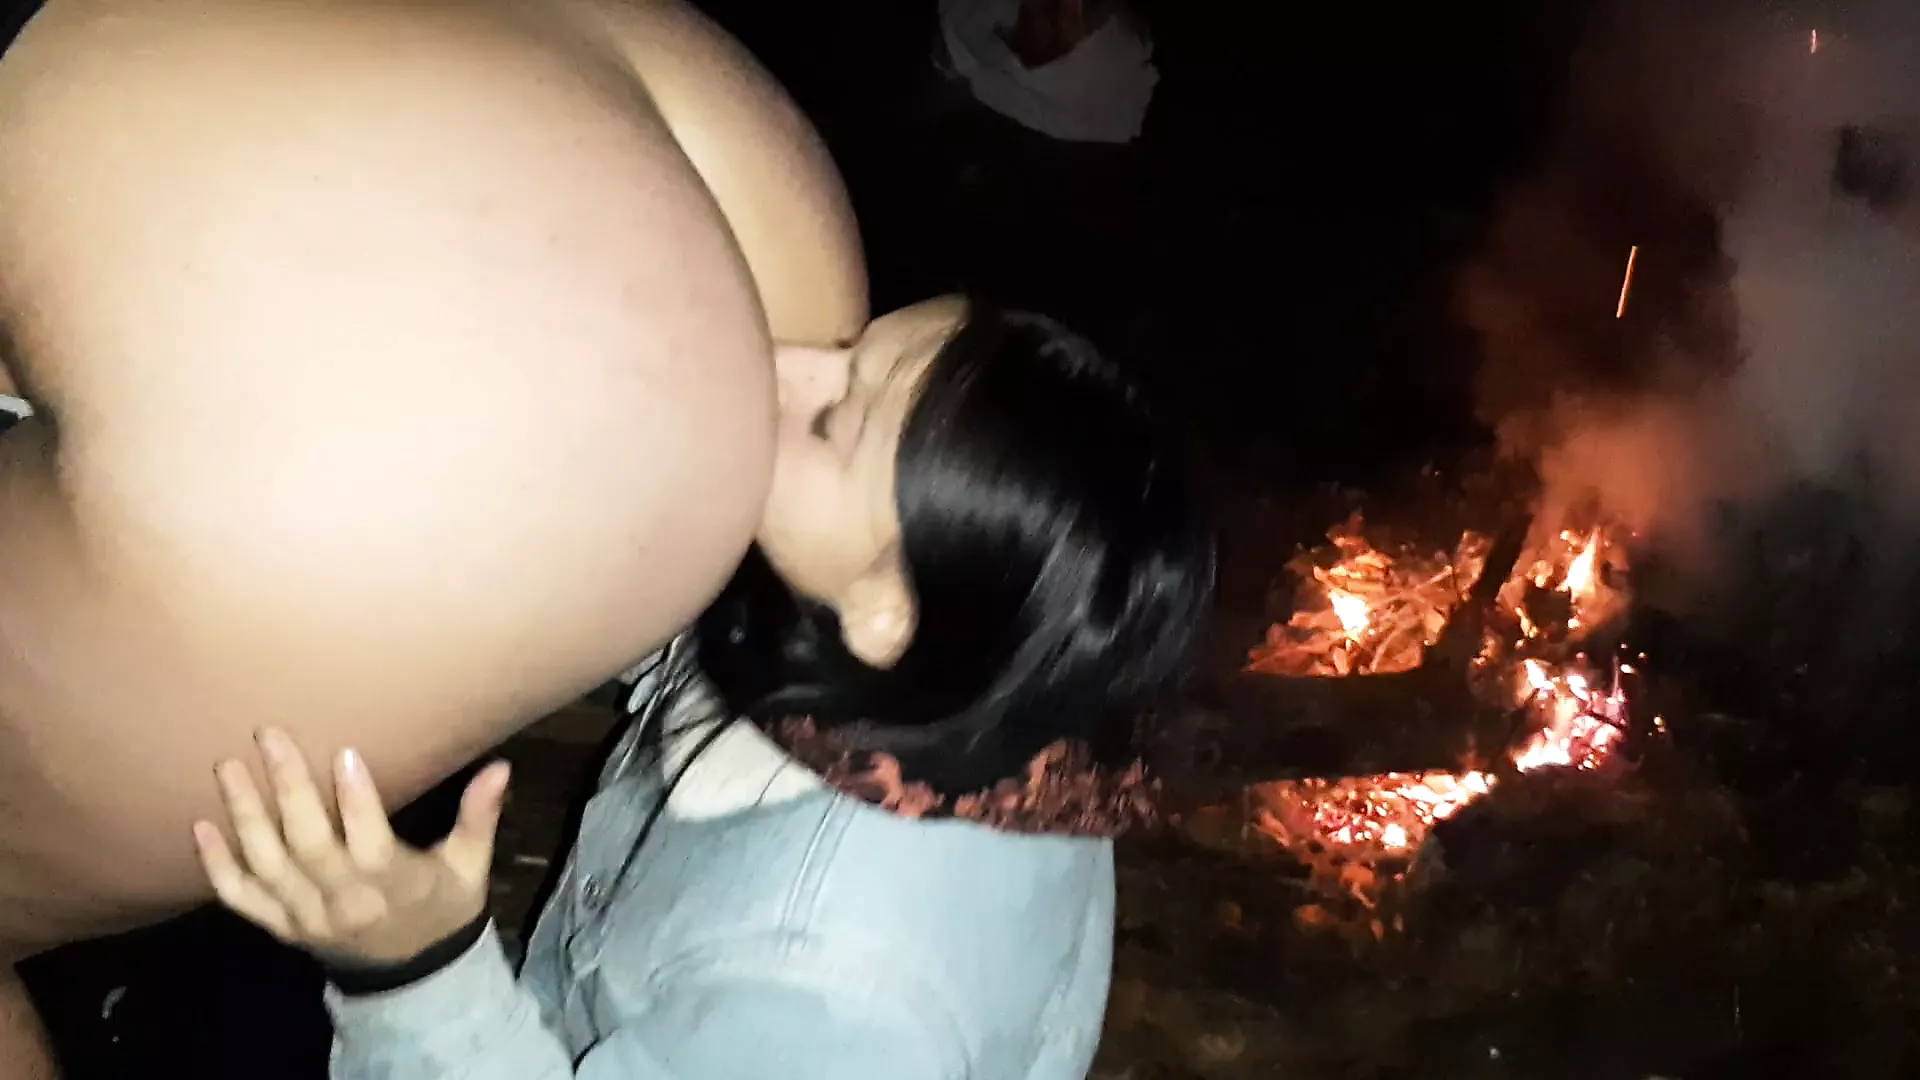 Licked my ass by the fire when friends quit smoking pic image